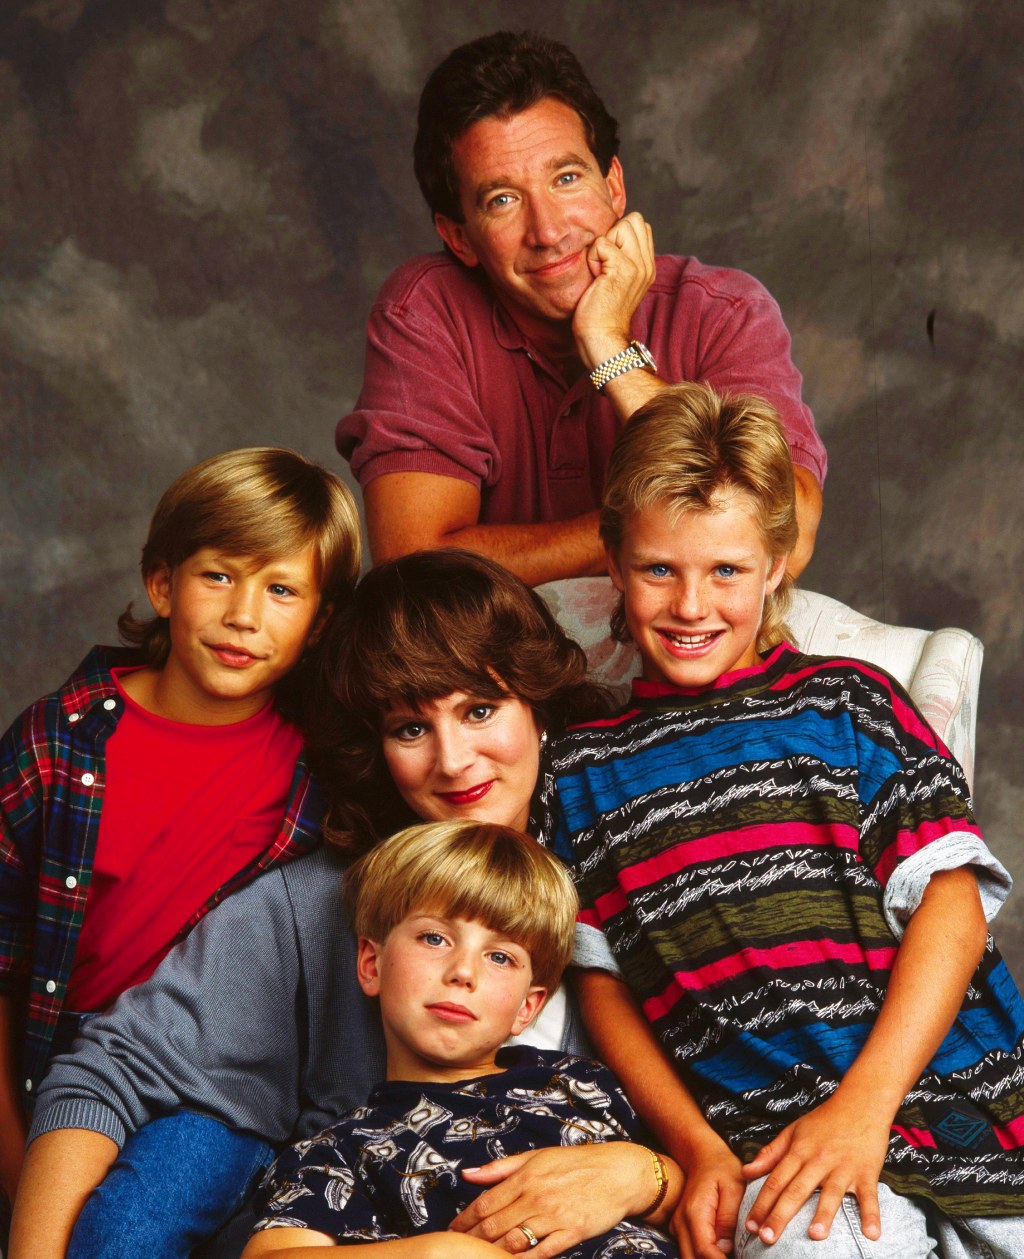 home improvement - Home Improvement cast - Where are they now?  Gallery  Wonderwall